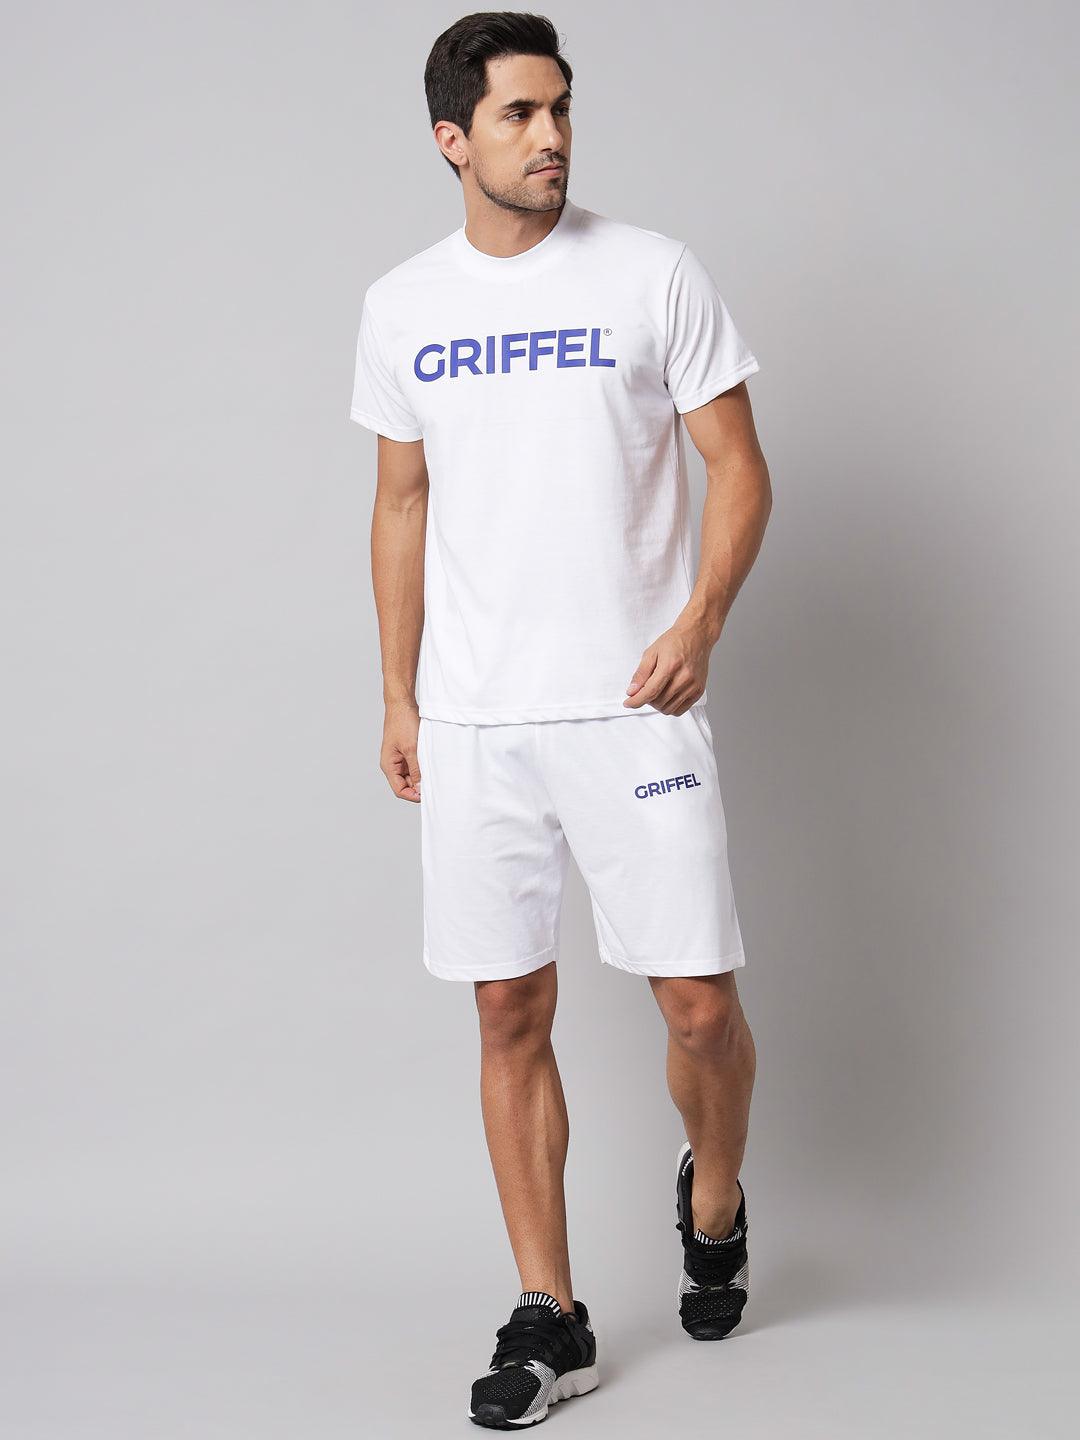 GRIFFEL Men Printed White Regular fit T-shirt and Short Set - griffel